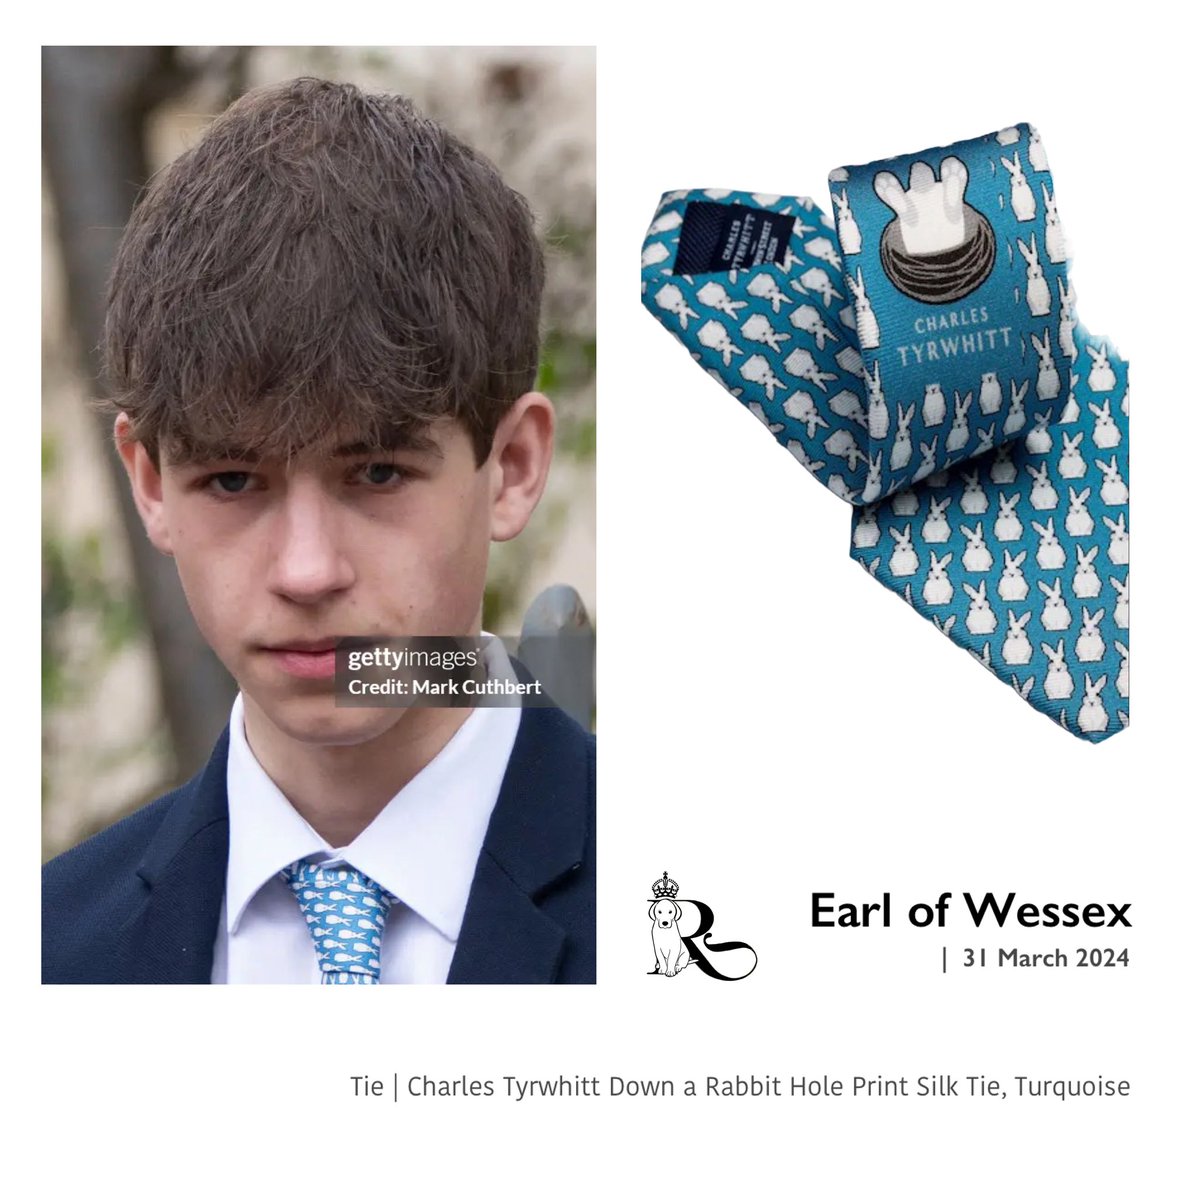 Alas, it doesn’t look as if the Earl of Wessex has been initiated into the family’s “Hermes Tie Club” just yet. Or at least not yesterday, as James’s tie is from Charles Tyrwhitt. For those interested, it is currently on sale at John Lewis. #TheDukeandDuchessofEdinburgh